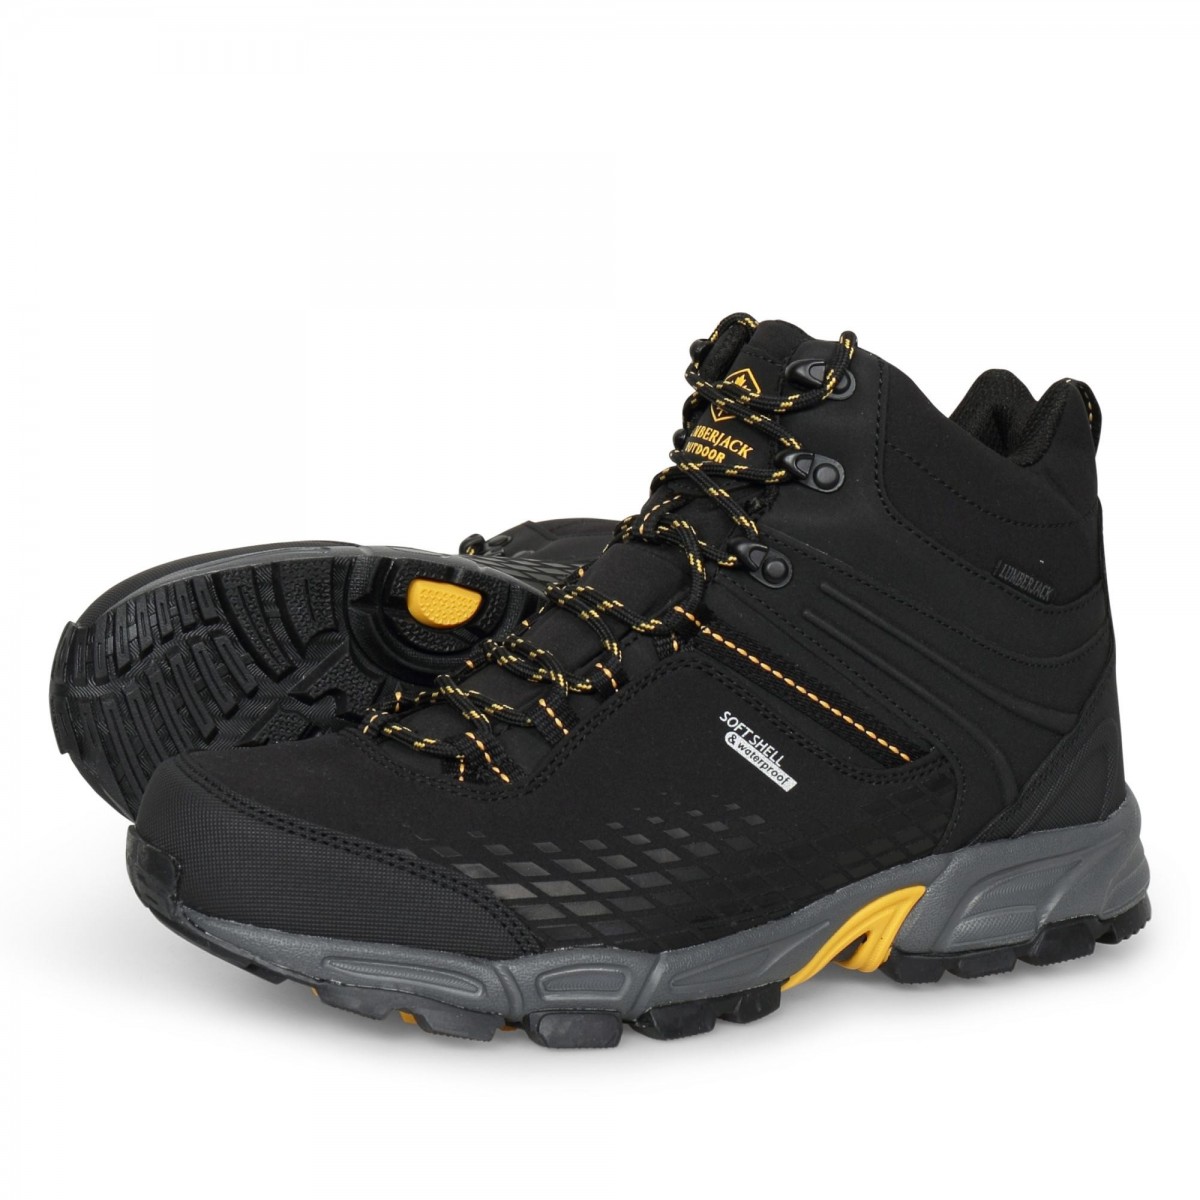 SHELL HIKING BOOT